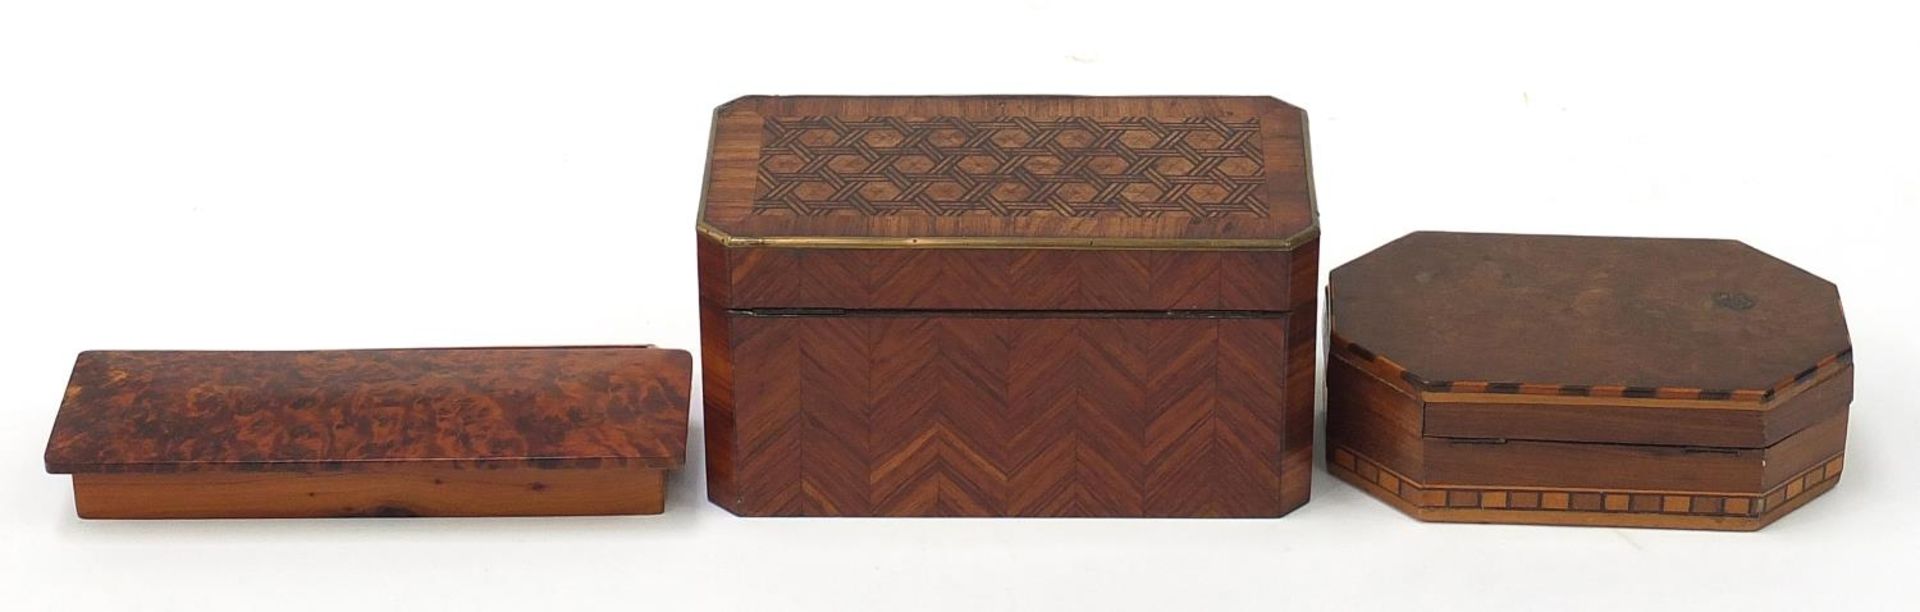 Woodenware including an inlaid rosewood tea caddy with twin divisional interior and a burr wood - Image 5 of 6